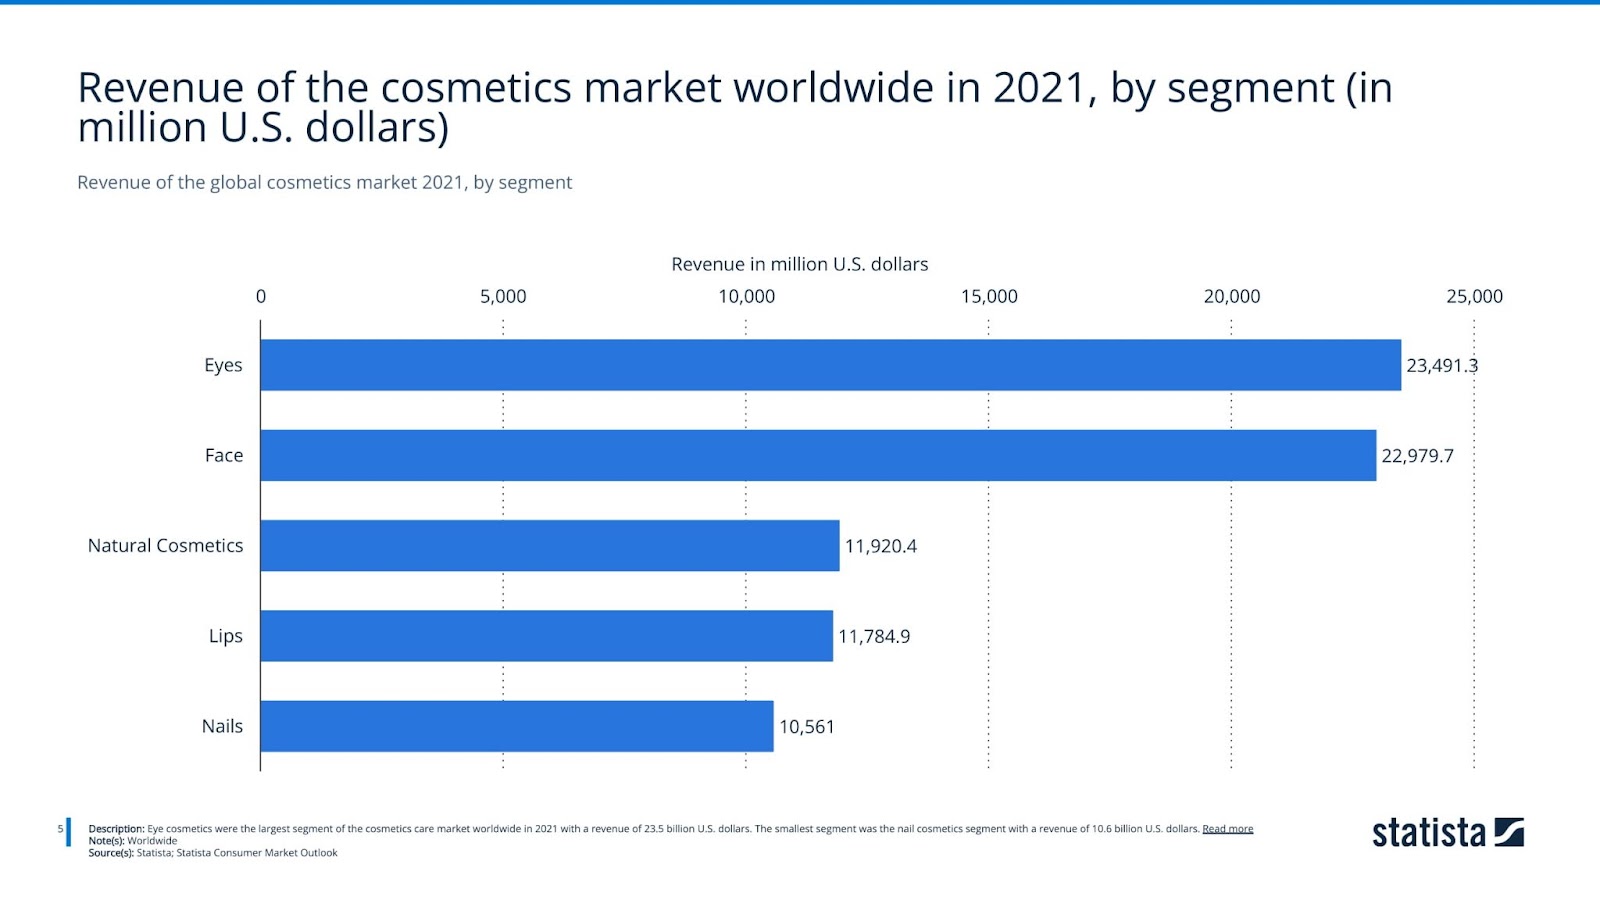 Revenue of the global cosmetics market 2021, by segment